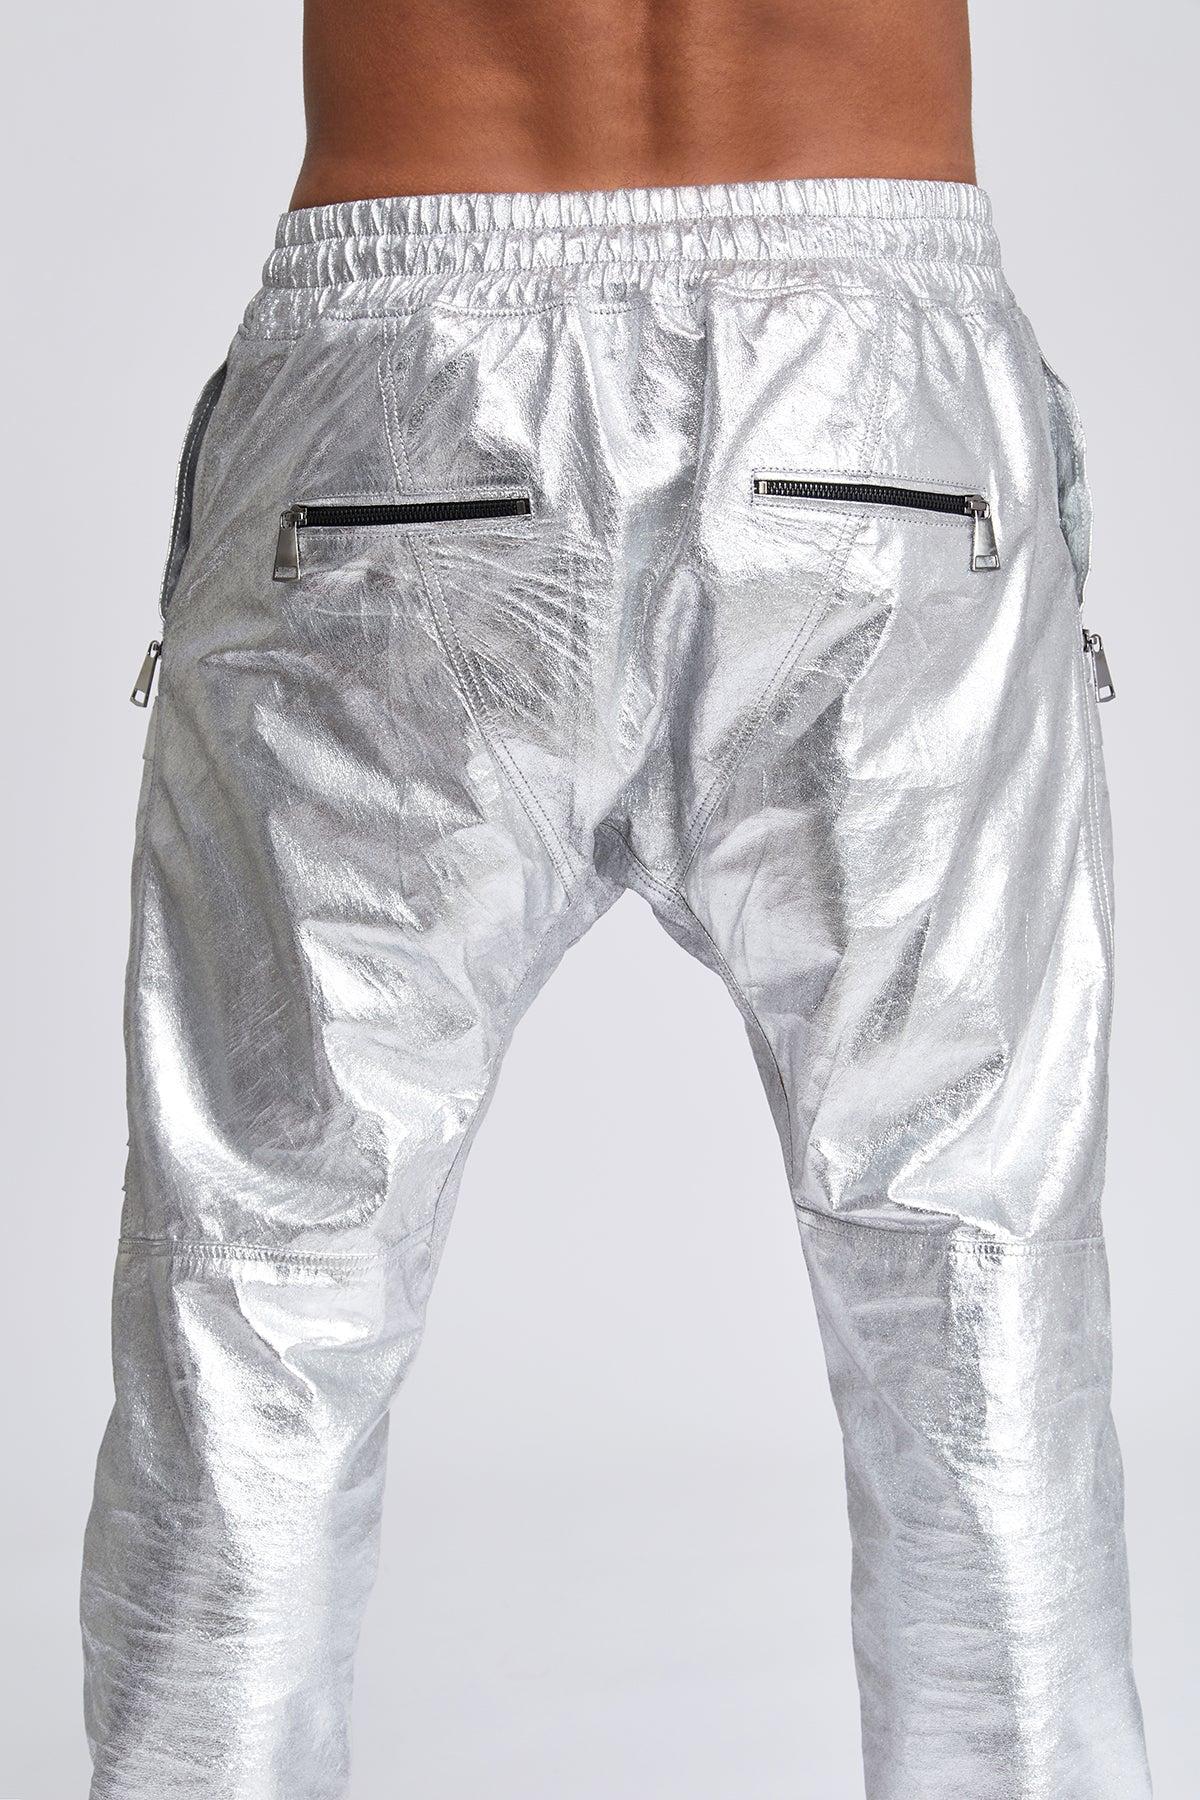 MM6 Maison Margiela - SILVER PANTS | HBX - Globally Curated Fashion and  Lifestyle by Hypebeast